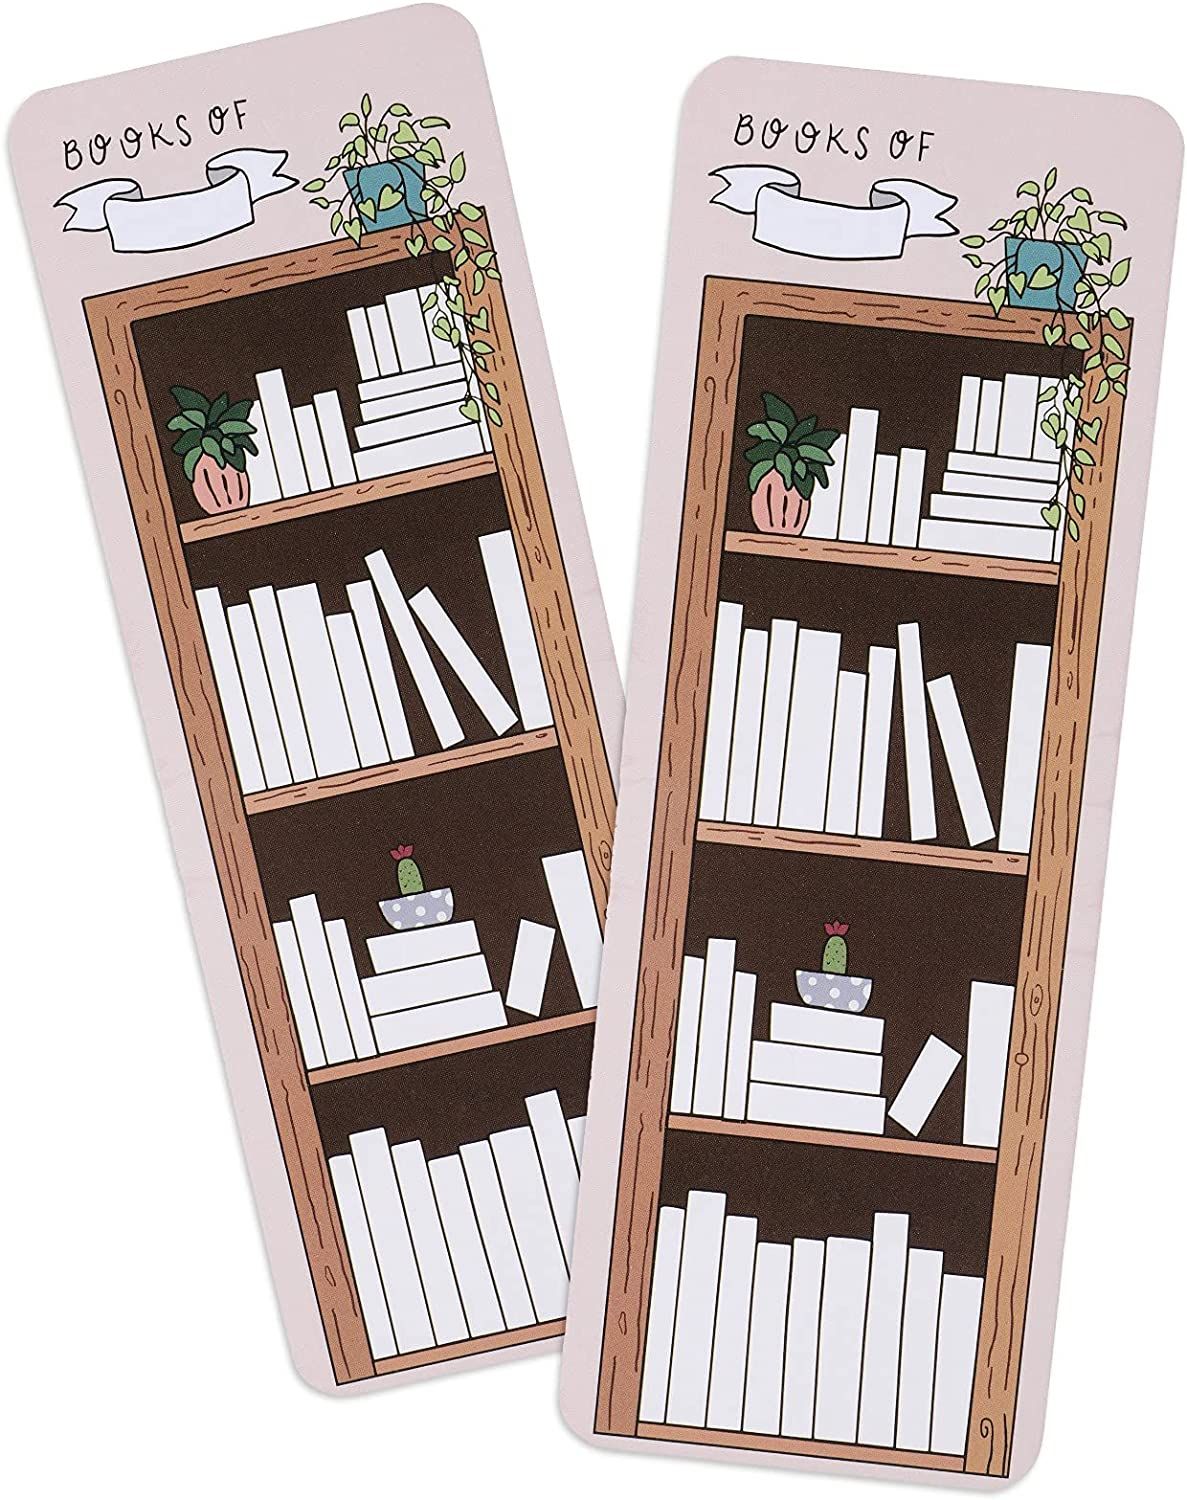 bookmarks that look like bookcases full of blank books